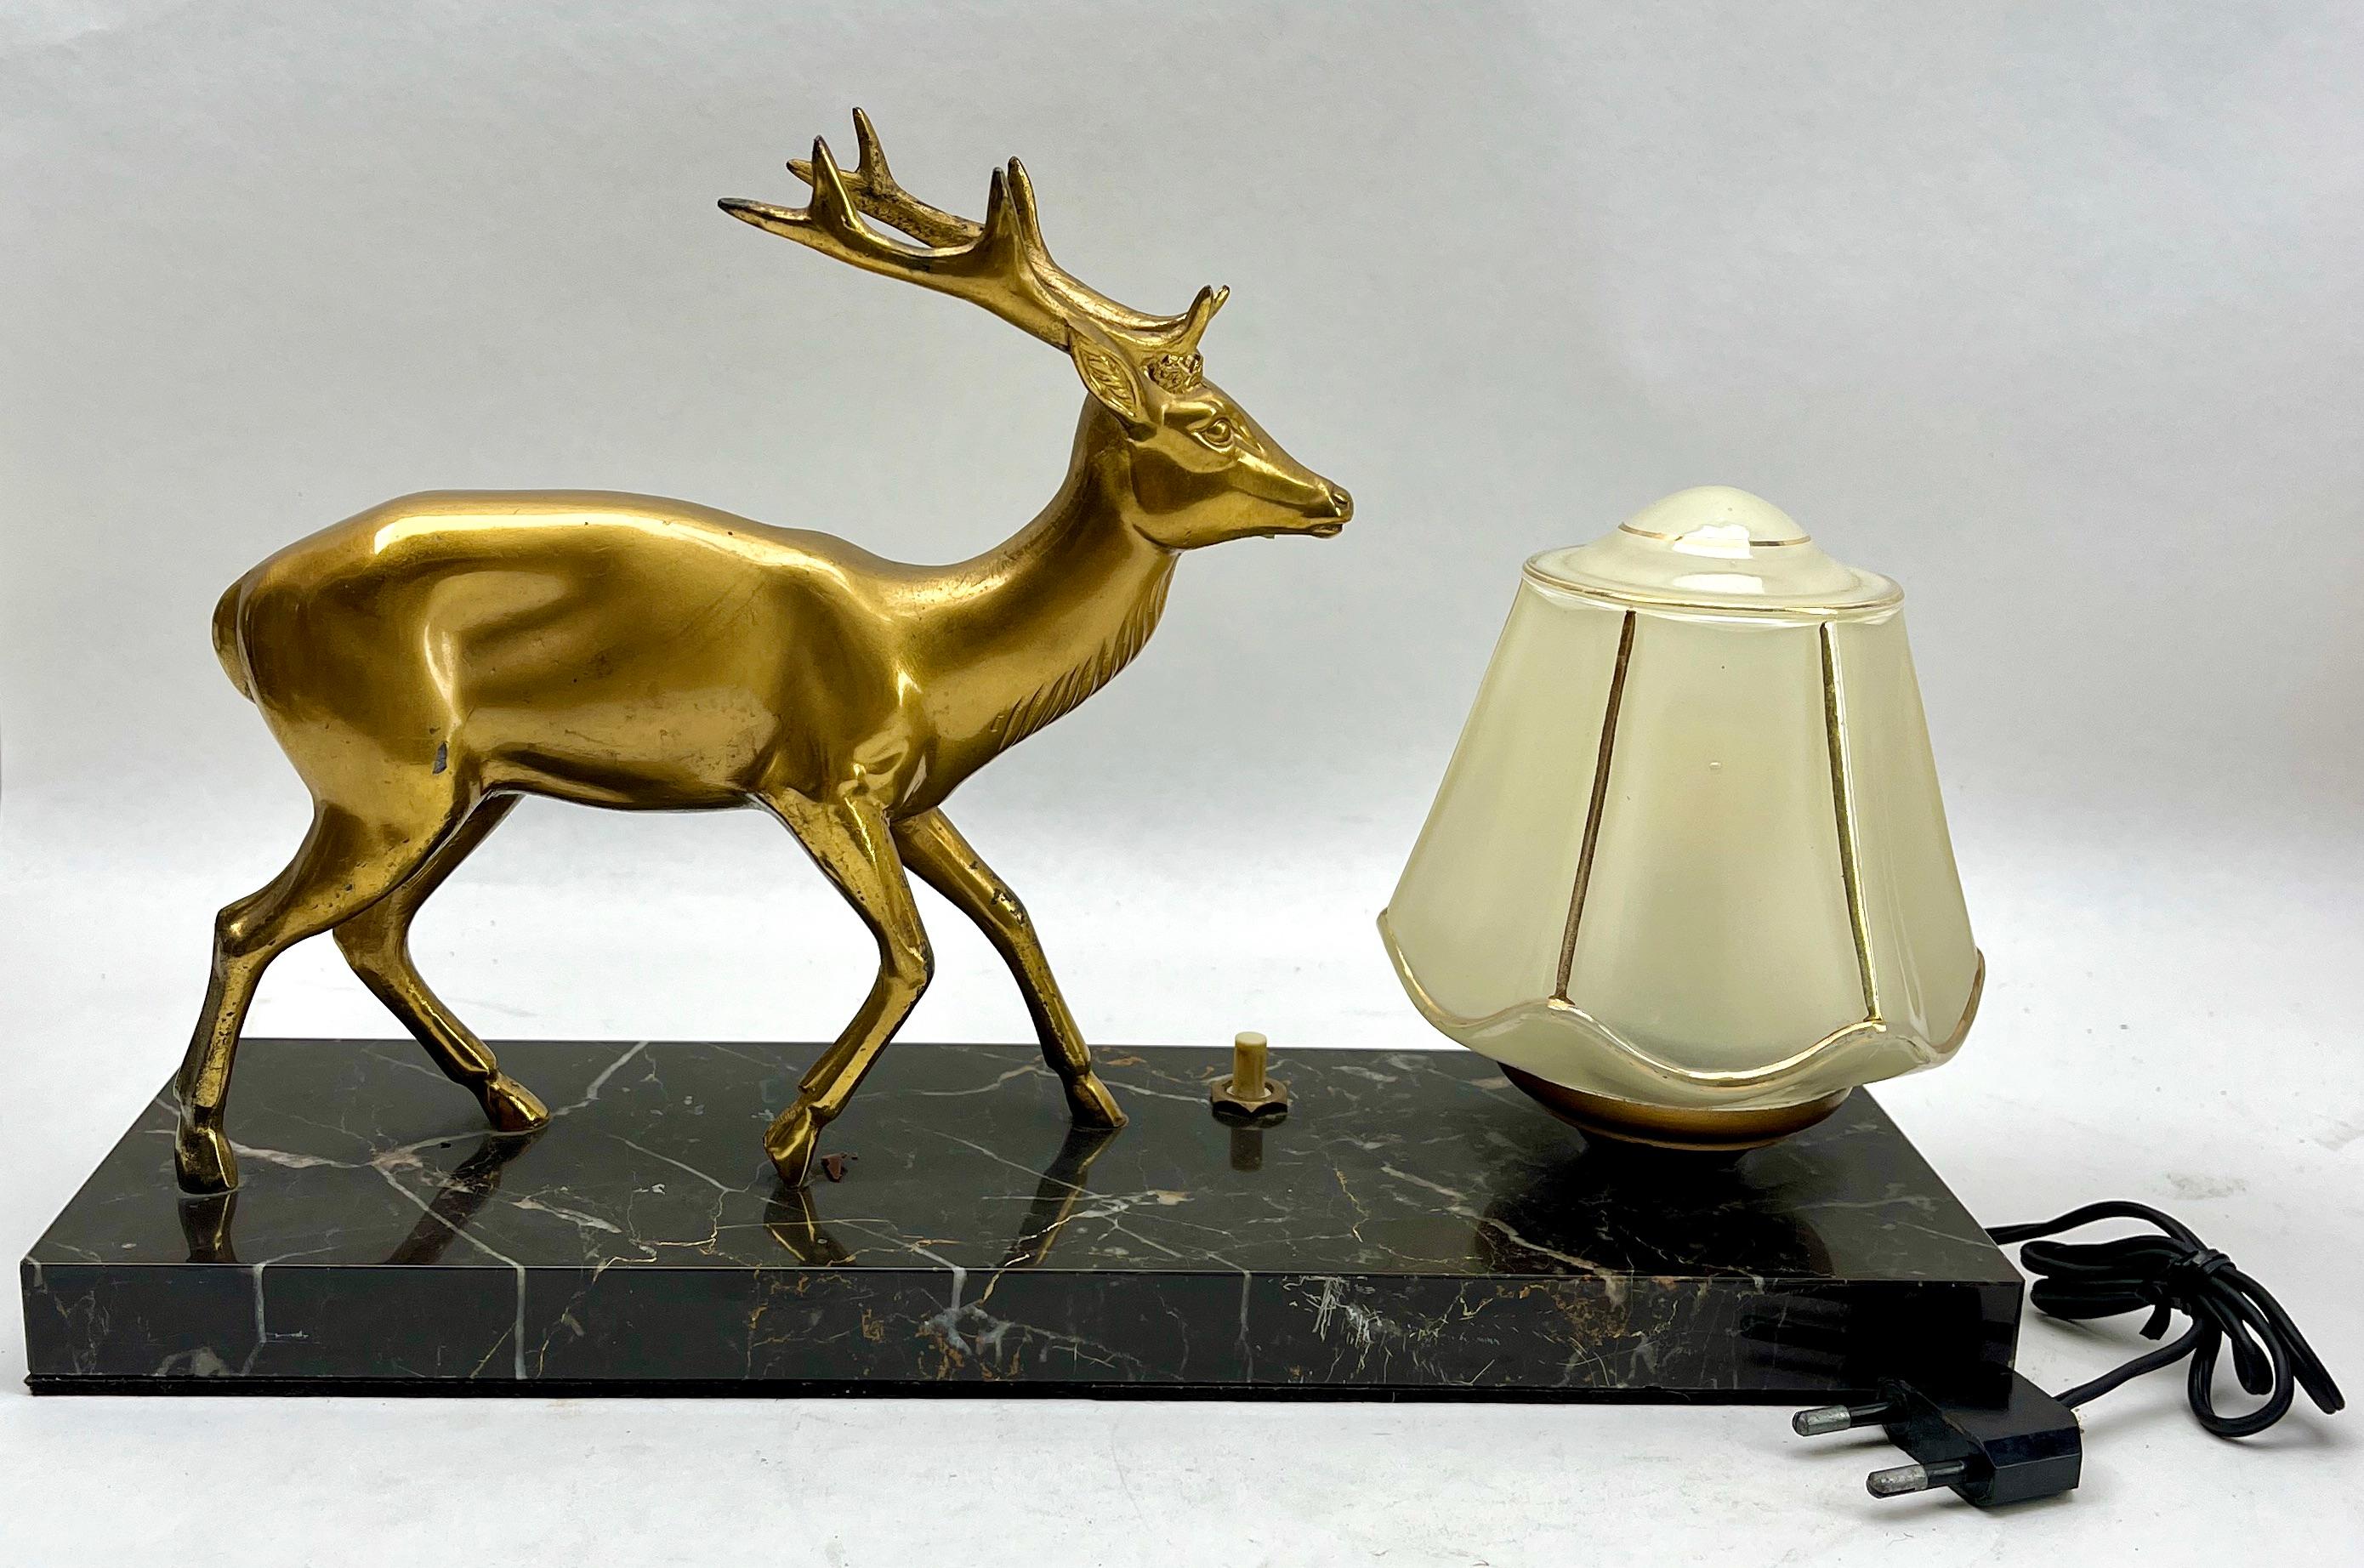 Stunning French Art Deco table lamp Gorgeous glass globe shade.
With Spelter Deer motif. Sitting on a marble base. 
In excellent condition and in full working order. And fitting E14 

The piece is in excellent and original condition and a real